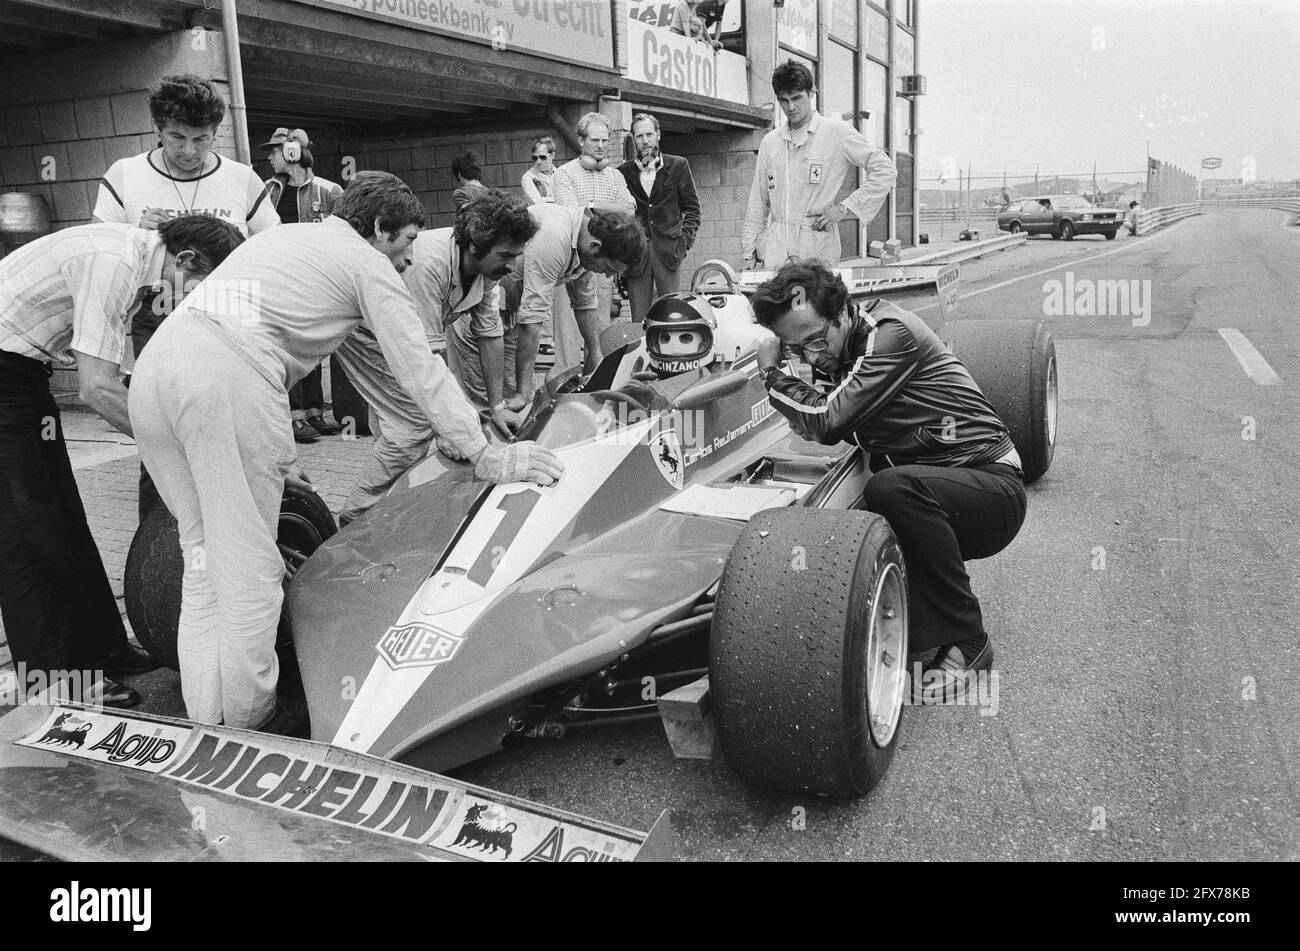 In connection with Formula I race Zandvoort (27-8) today testing of tires; Carlos Reutemann during stop, August 1, 1978, car races, motorsports, training, The Netherlands, 20th century press agency photo, news to remember, documentary, historic photography 1945-1990, visual stories, human history of the Twentieth Century, capturing moments in time Stock Photo